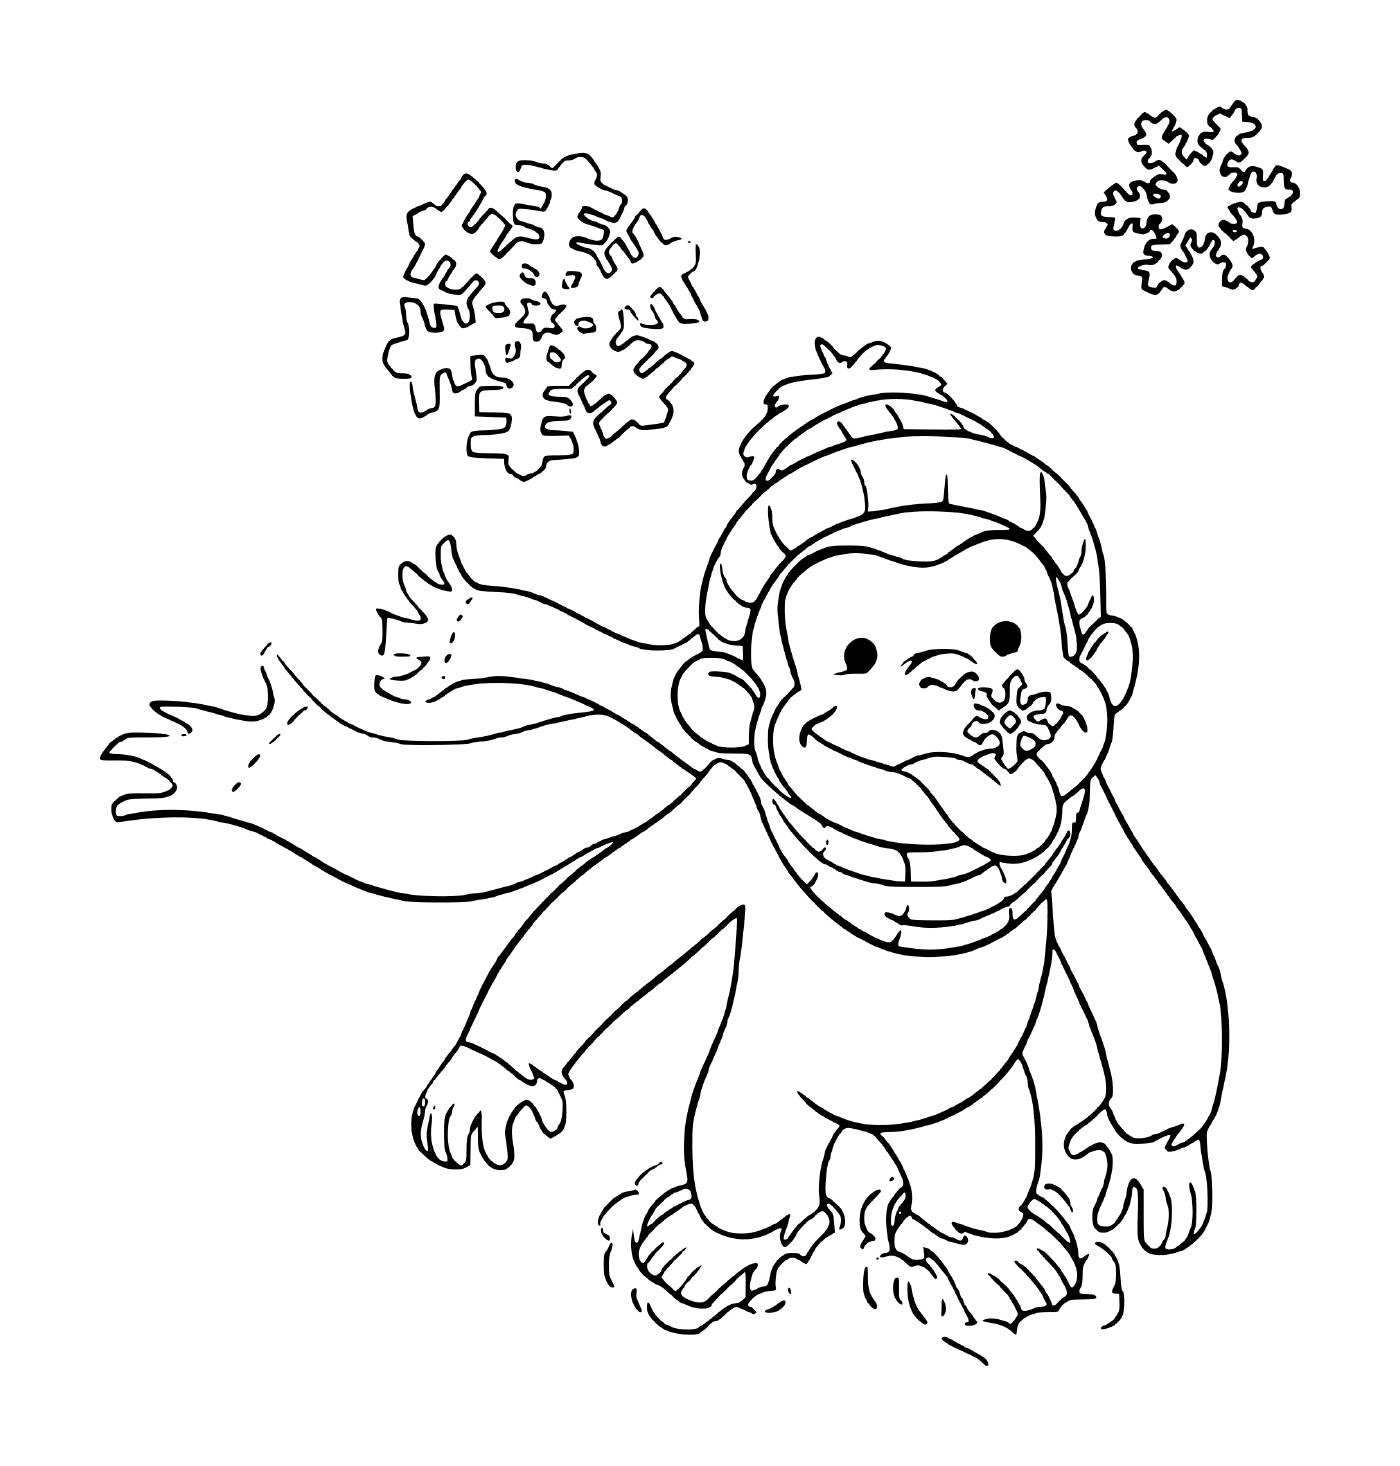  Monkey with a hat in the snow 